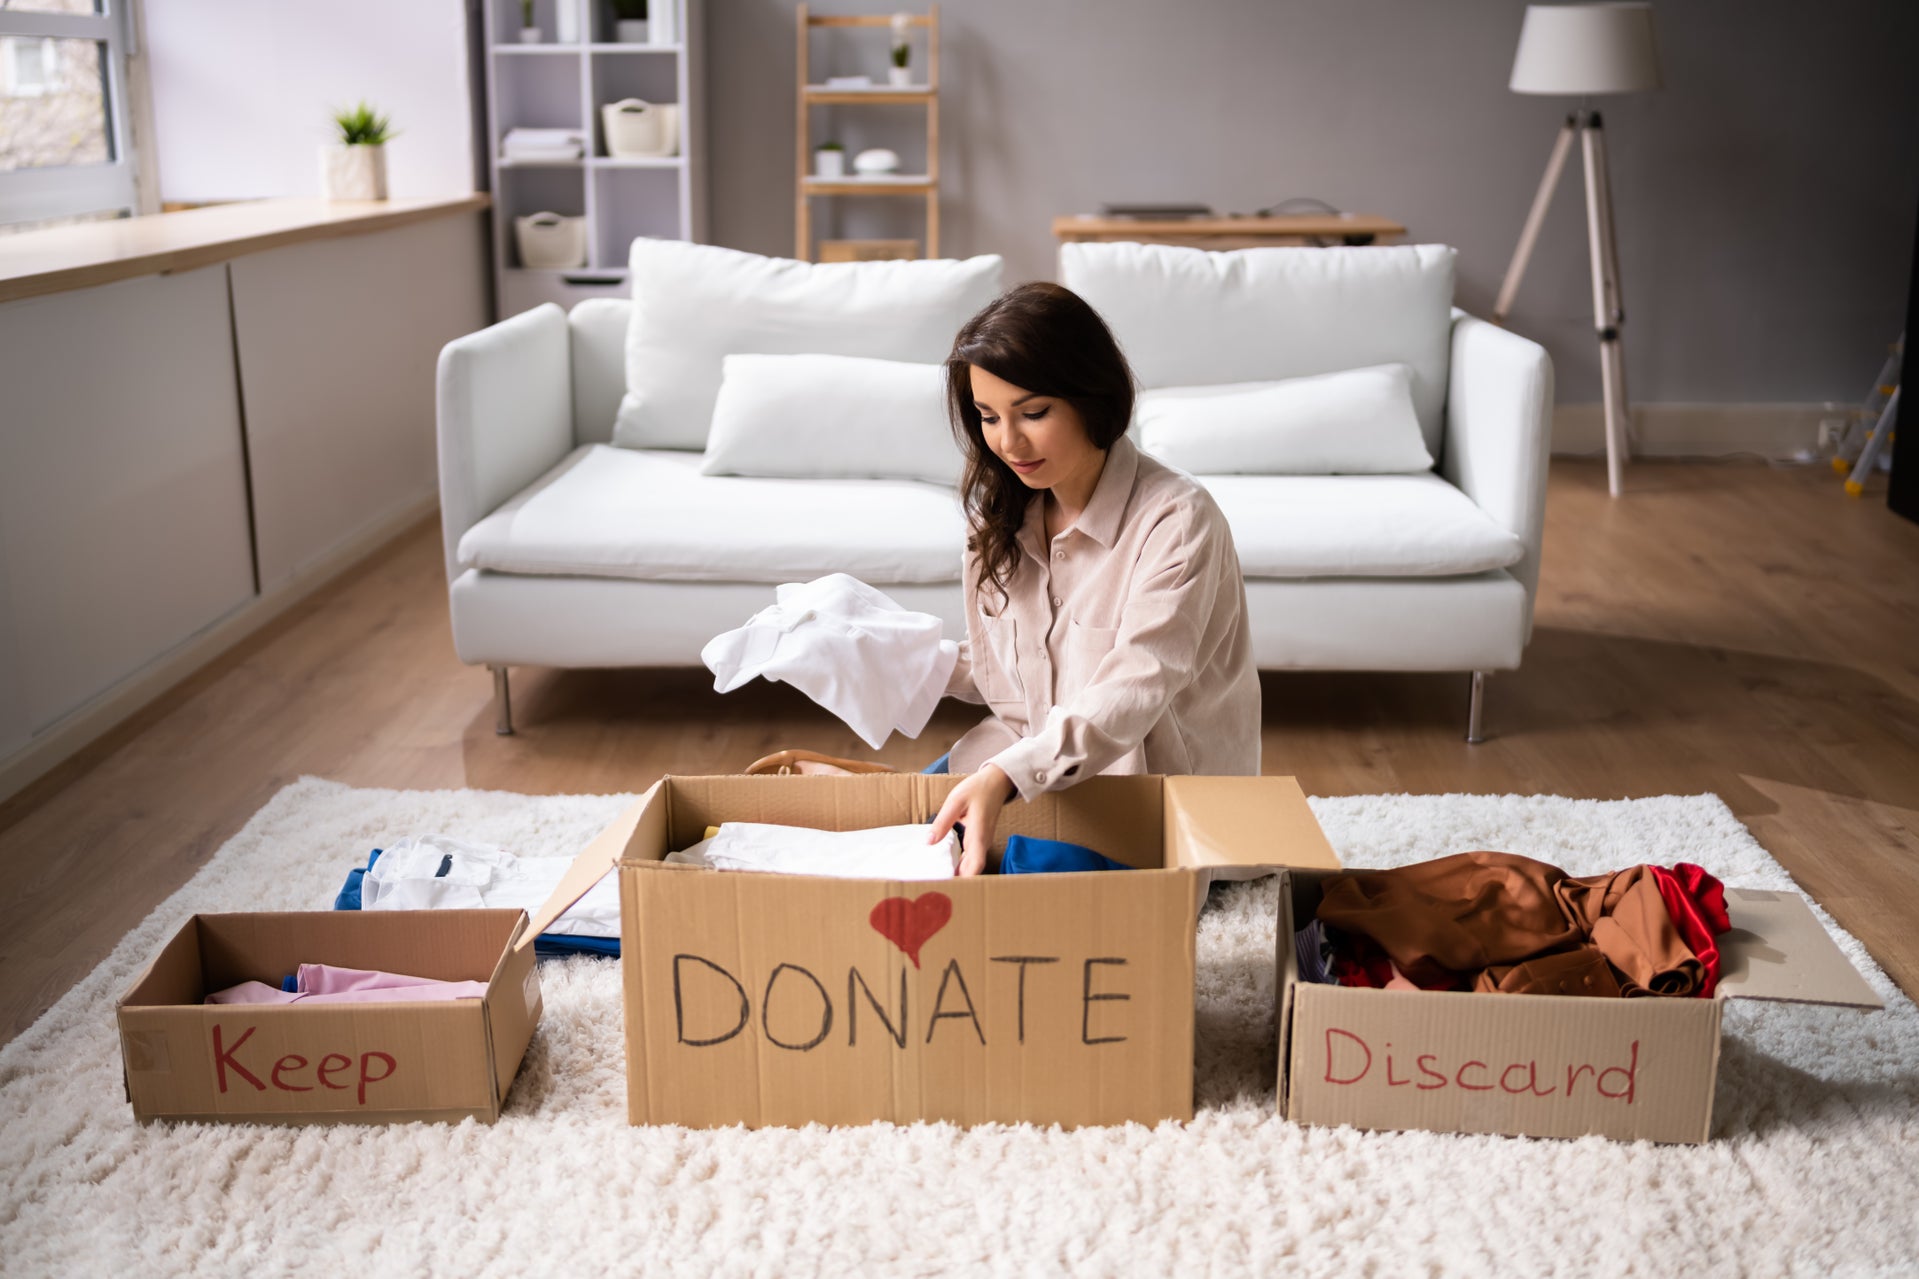 Chesapeake Homes Discover 7 Tips to Help Declutter Your Home Effortlessly!